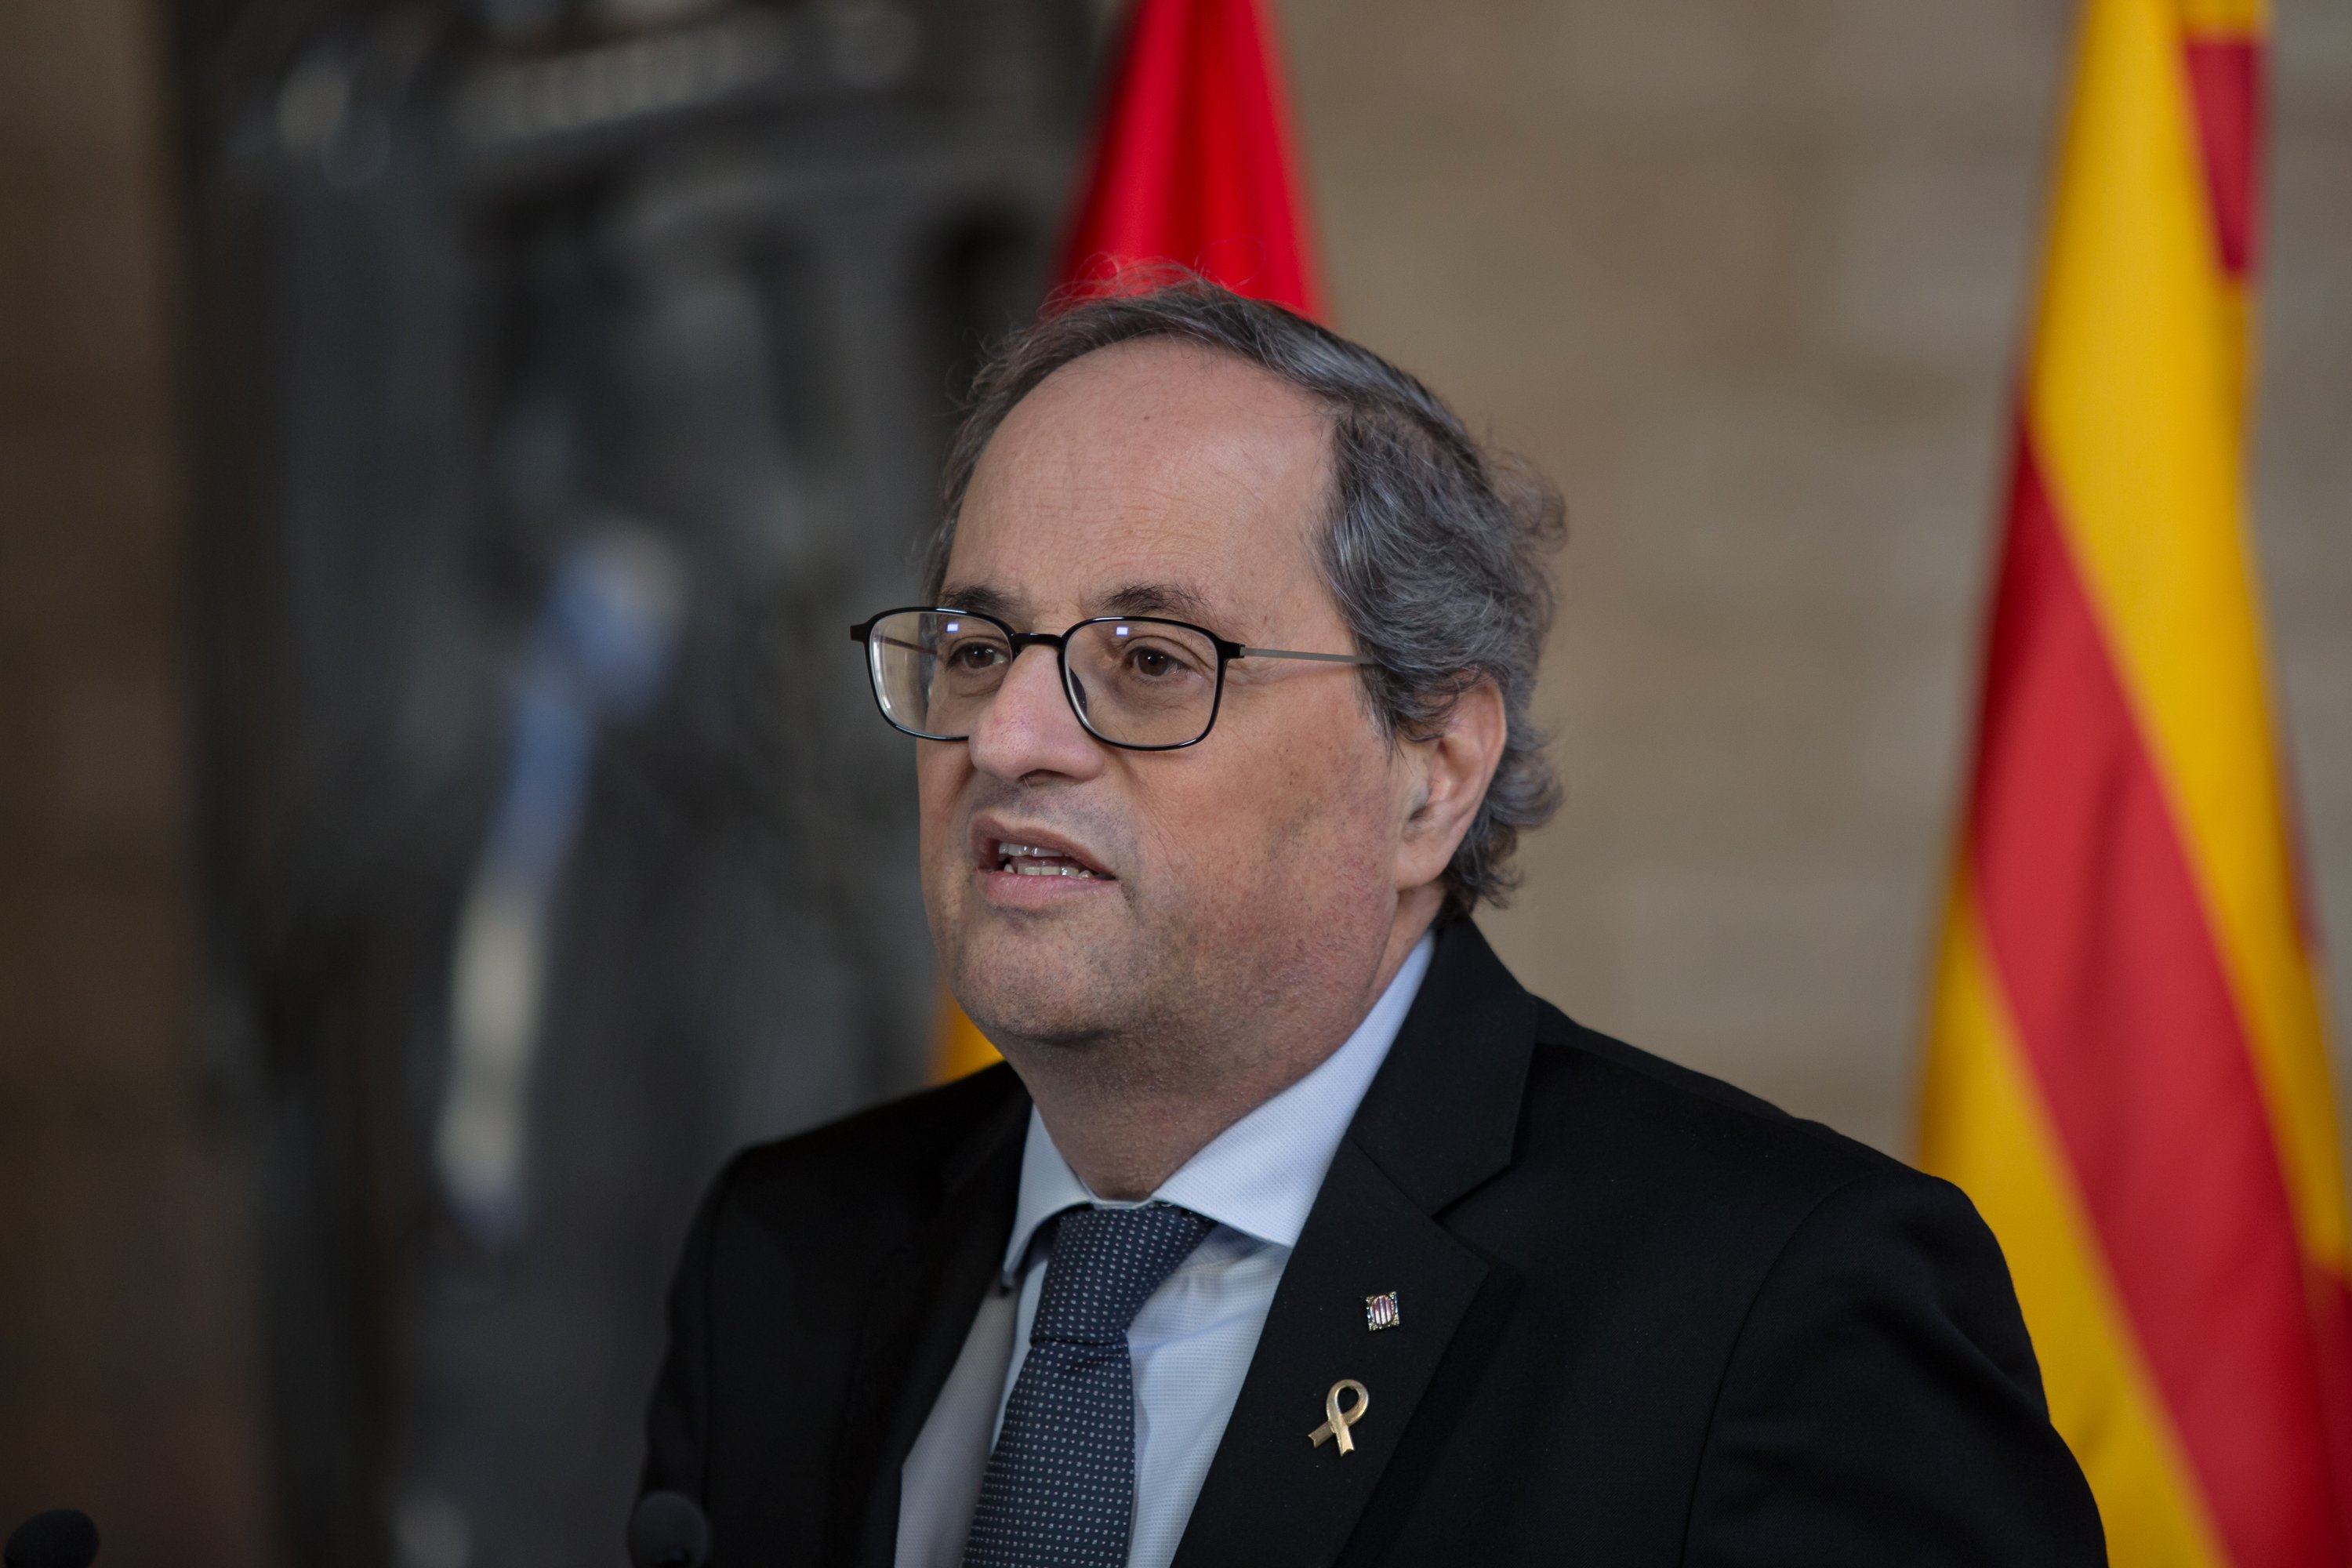 Torra to take legal action against electoral board member on payroll of Cs party